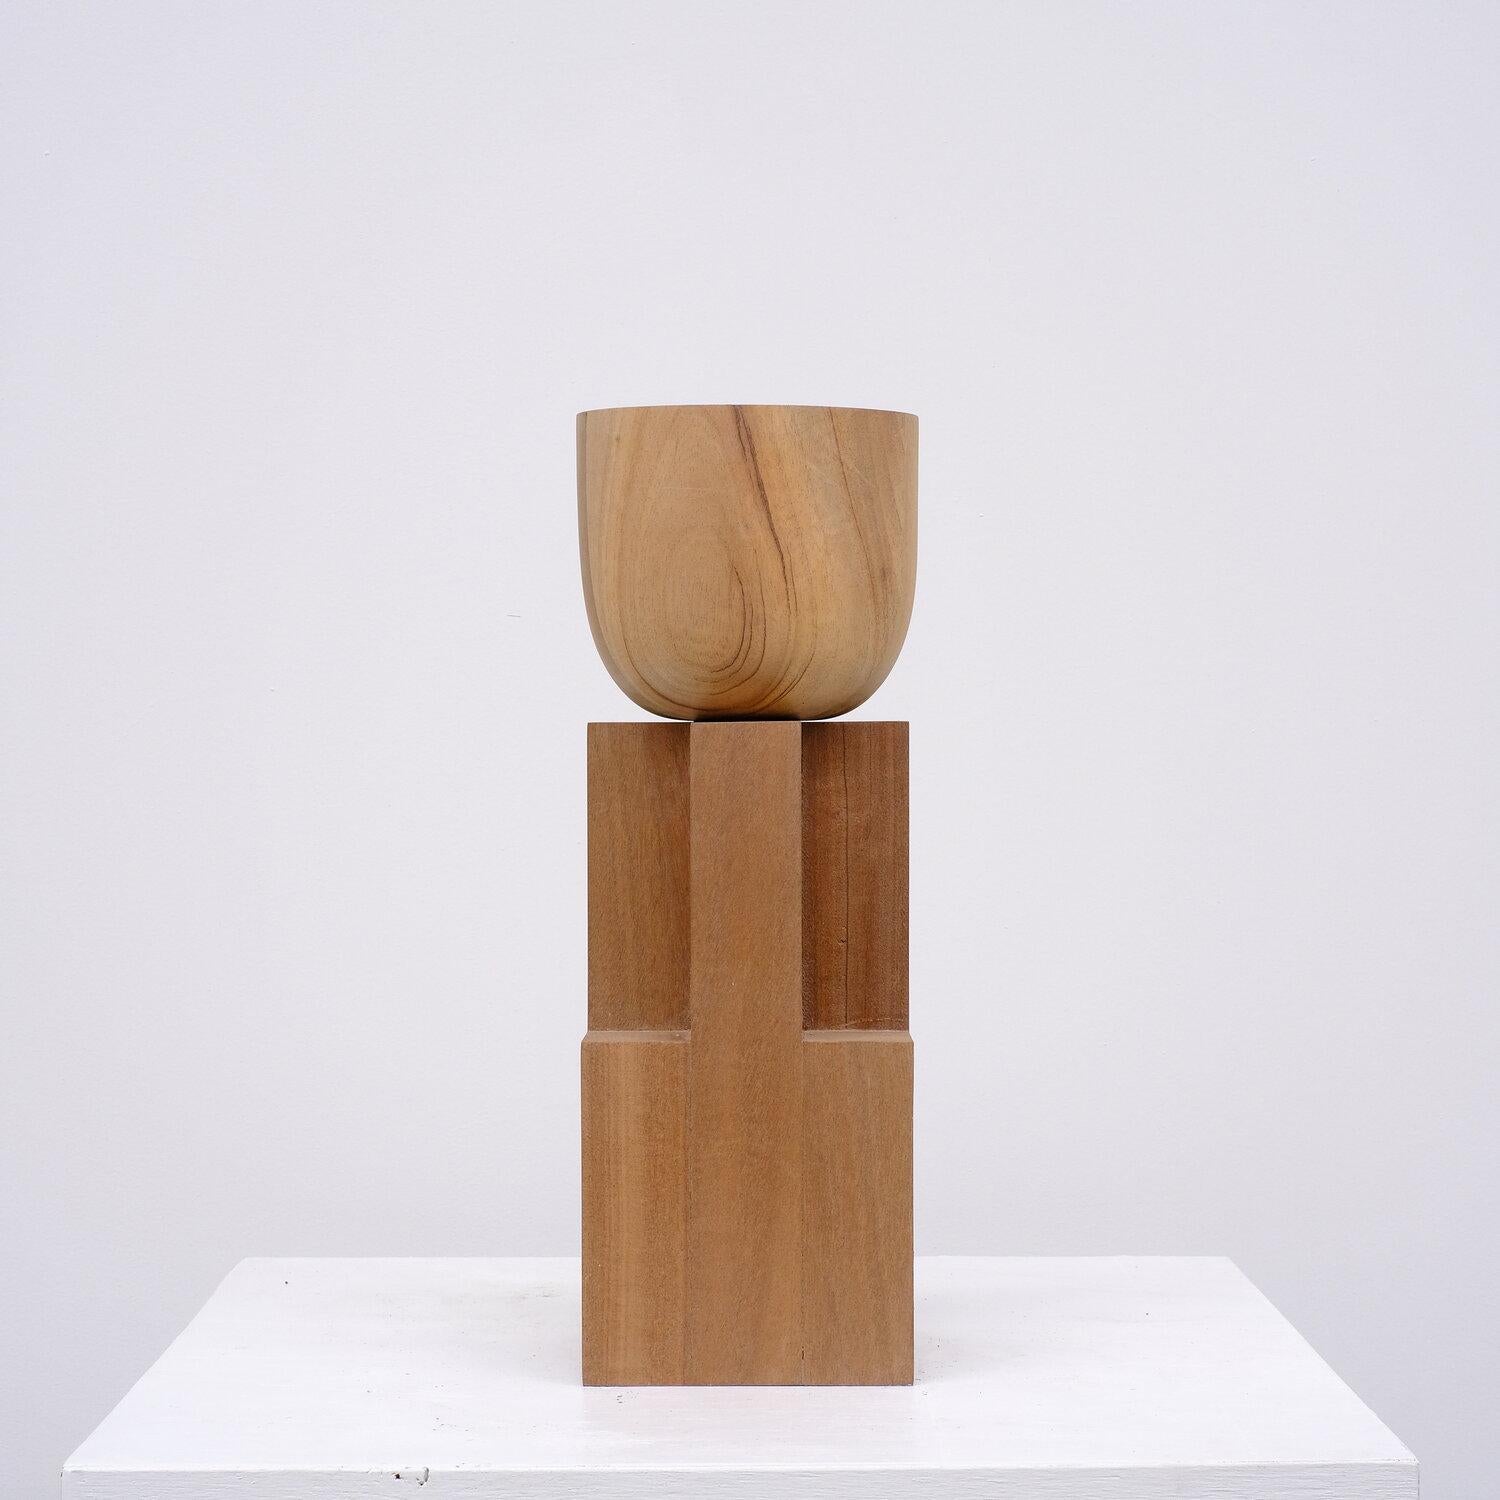 Contemporary vase in walnut, Goblet vase by Arno Declercq

Material: African Walnut
Dimensions: Dimensions: 40 cm H x 14 cm W x 14 cm D

Made by hand, in Belgium.

Arno Declercq
Belgian designer and art dealer who makes bespoke objects with